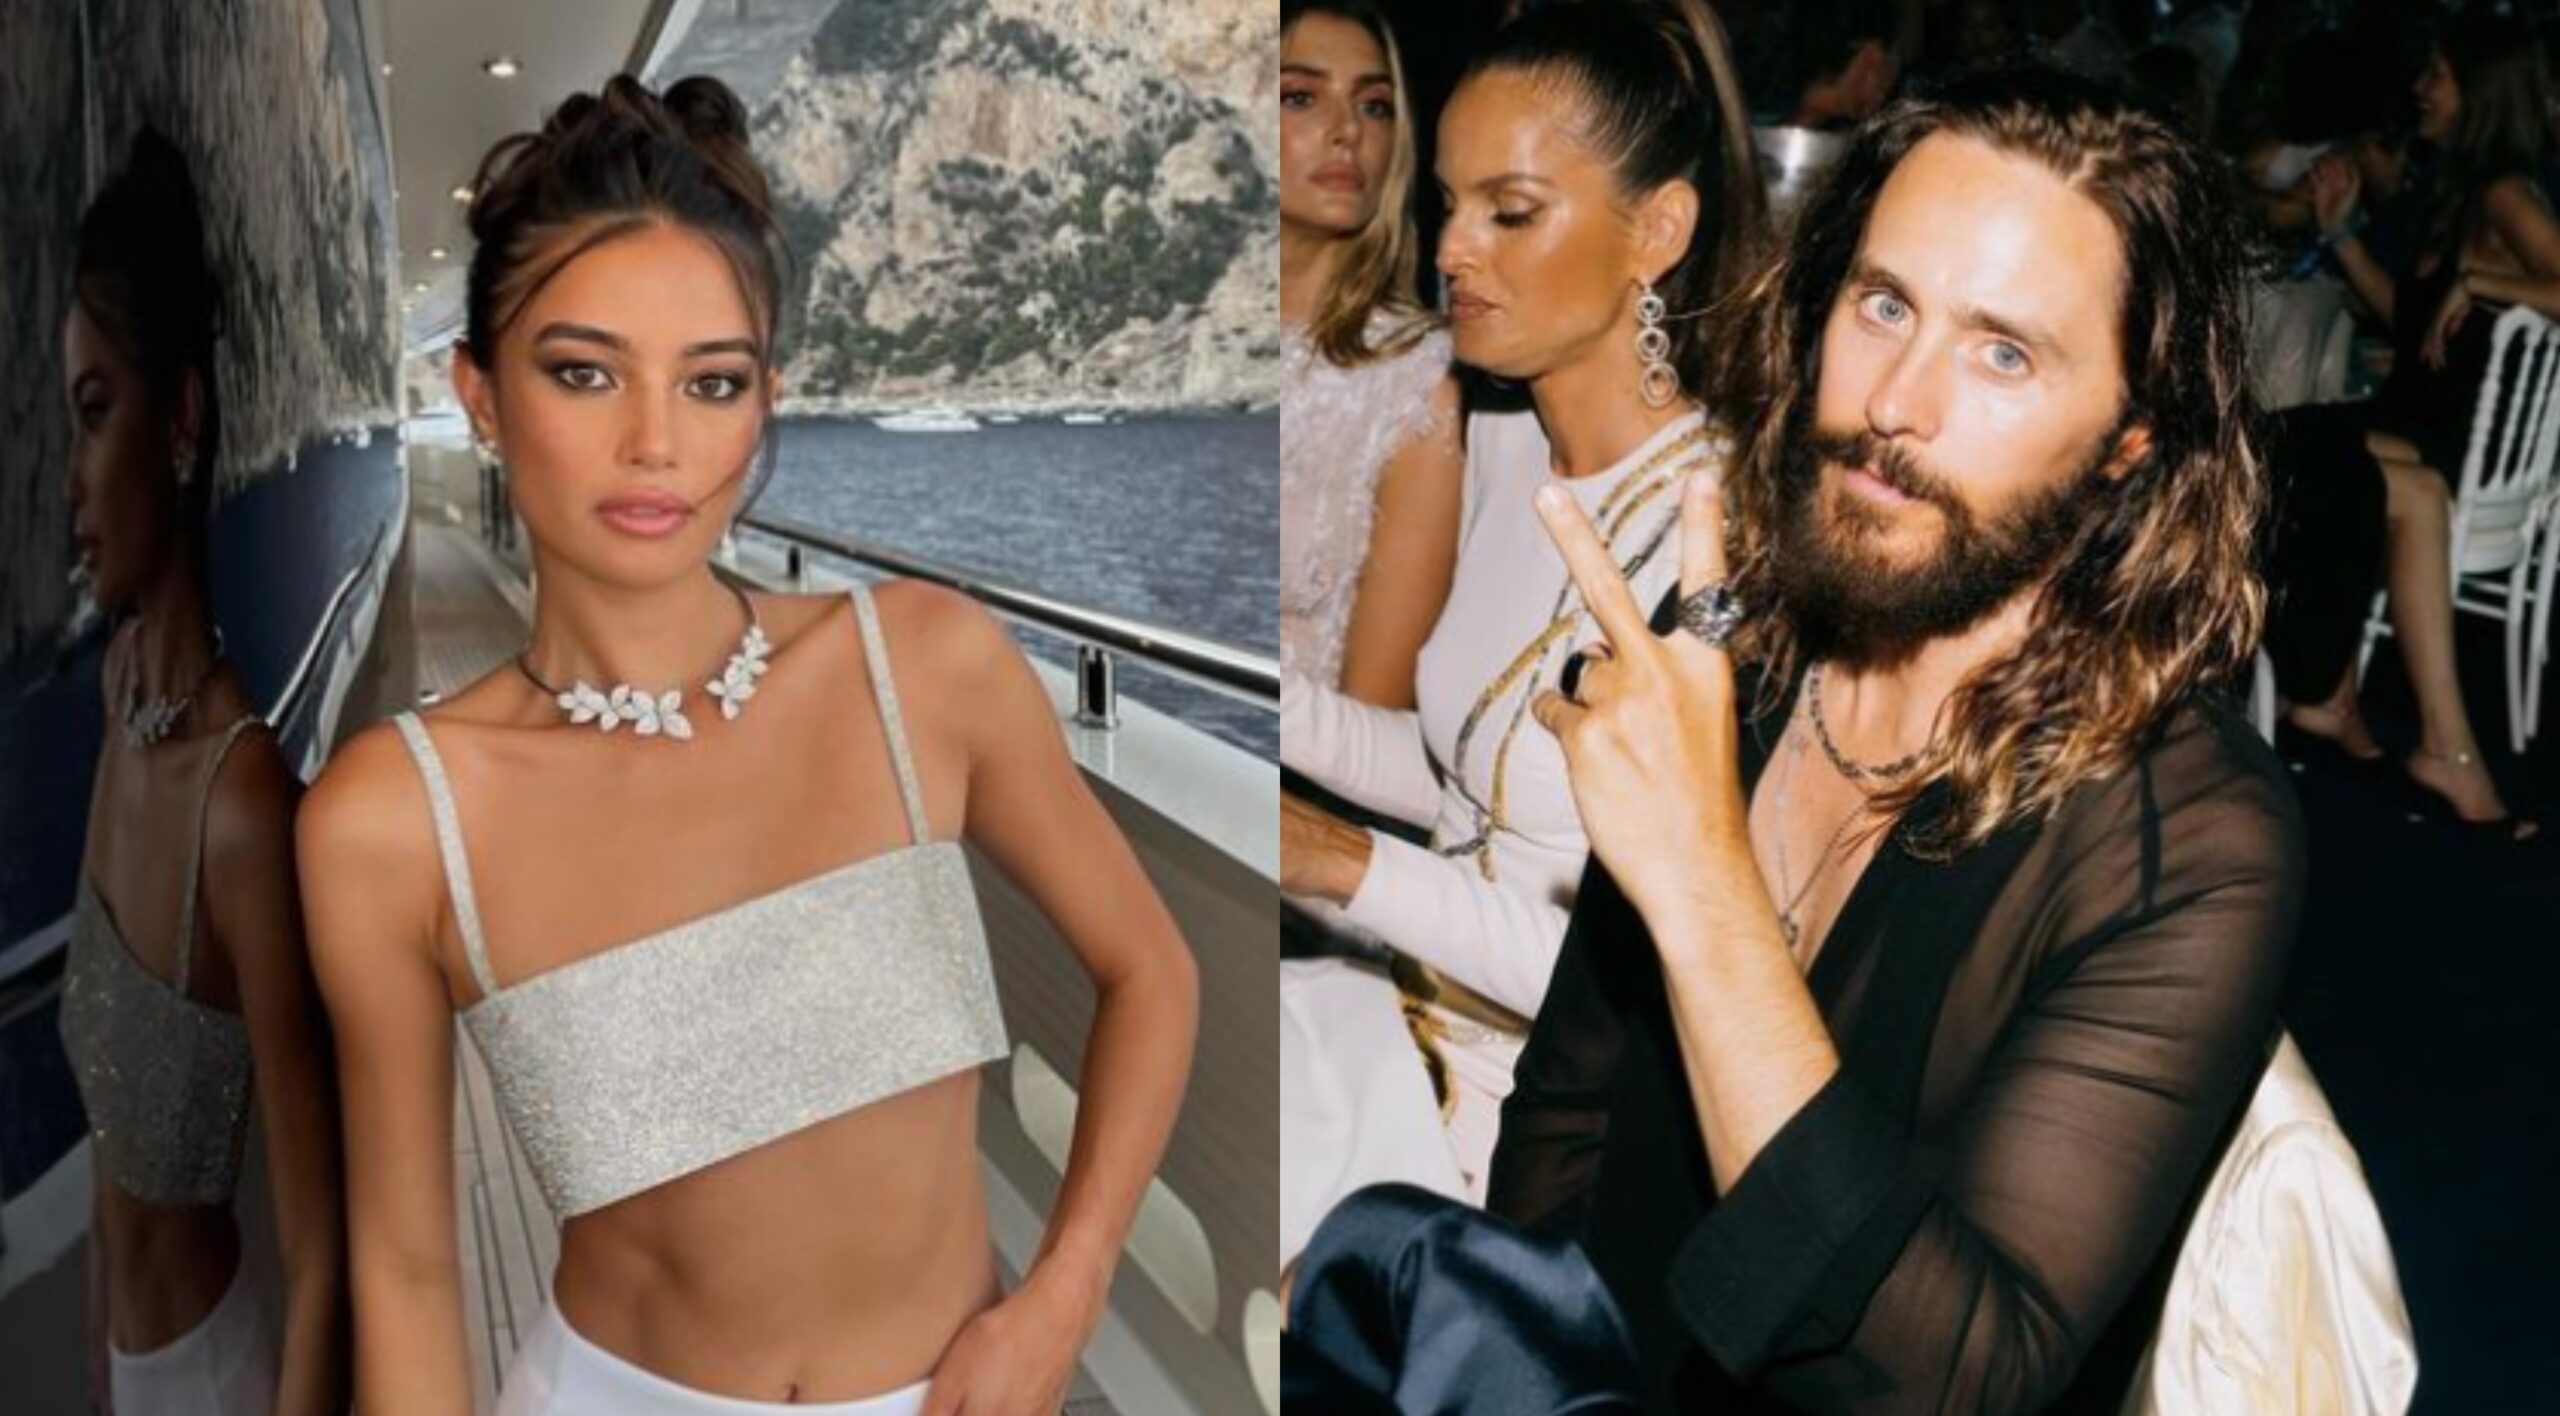 Jared Leto, Kelsey Merritt spark dating rumors after being spotted in Italy 